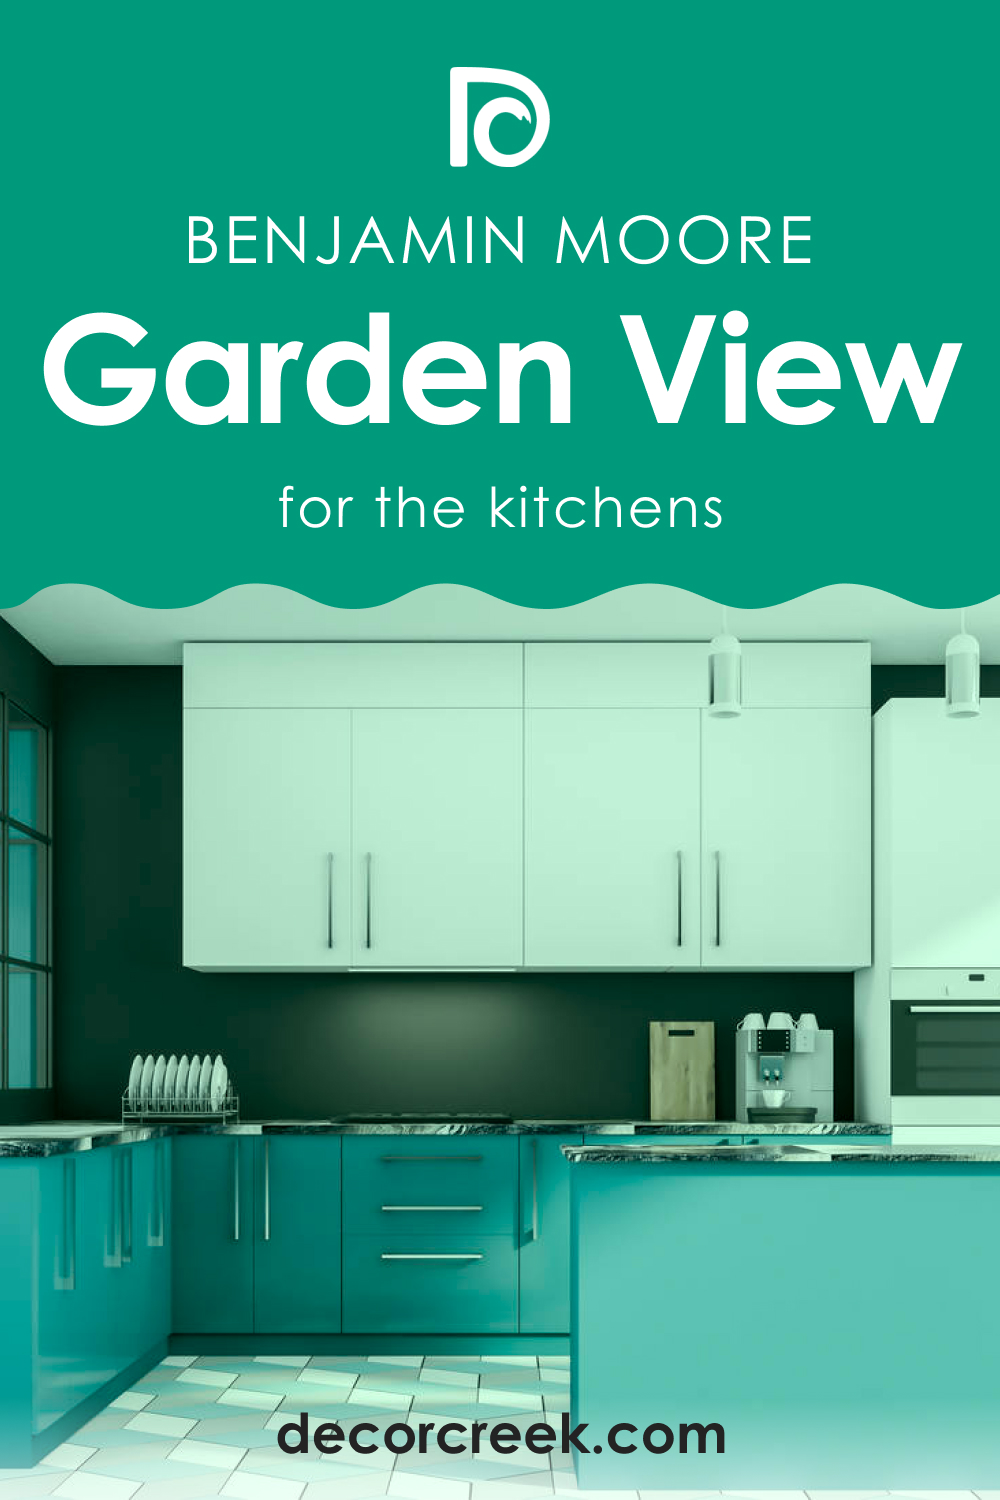 How to Use Garden View 616 in the Kitchen?